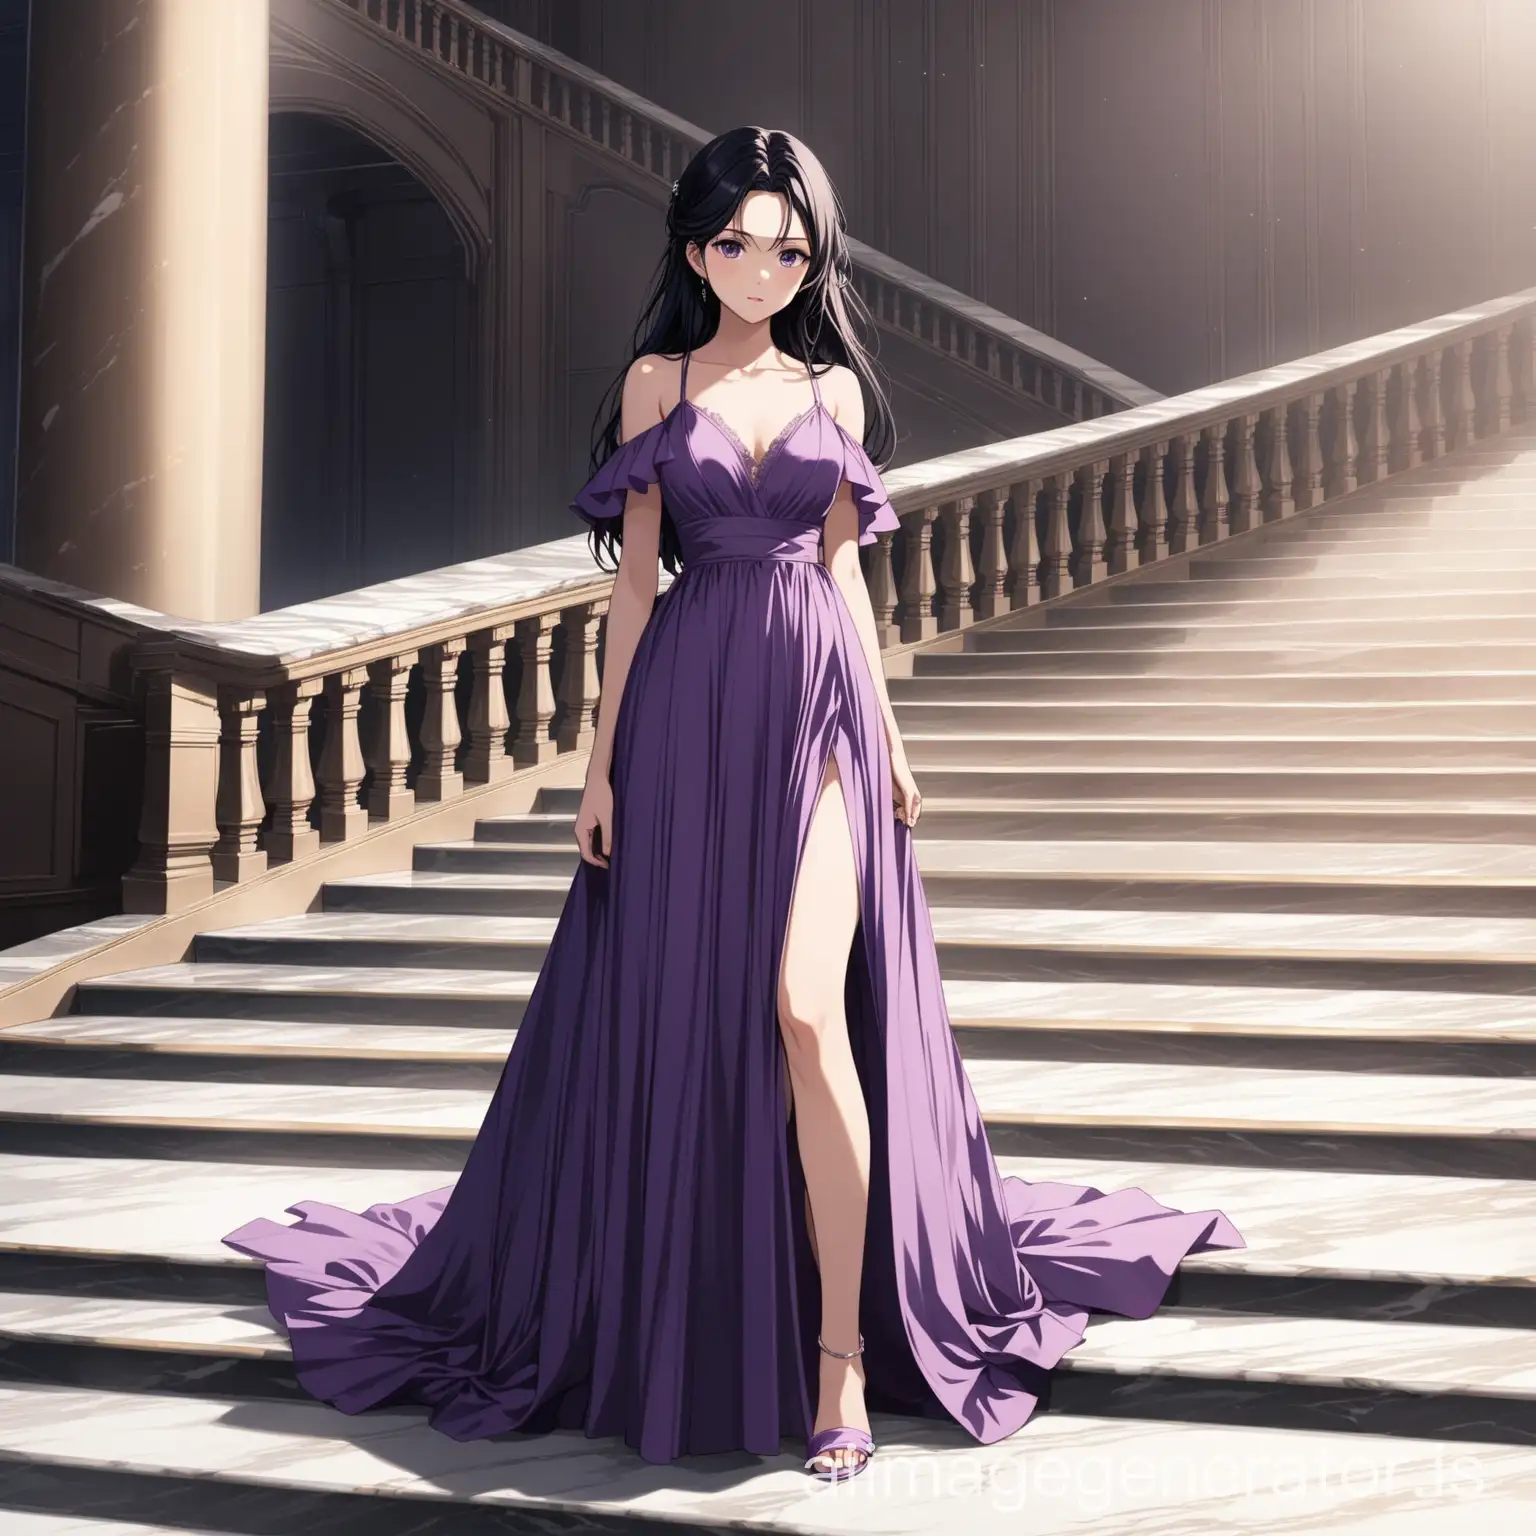 anime girl in a purple gown with black hair standing on marble stairs